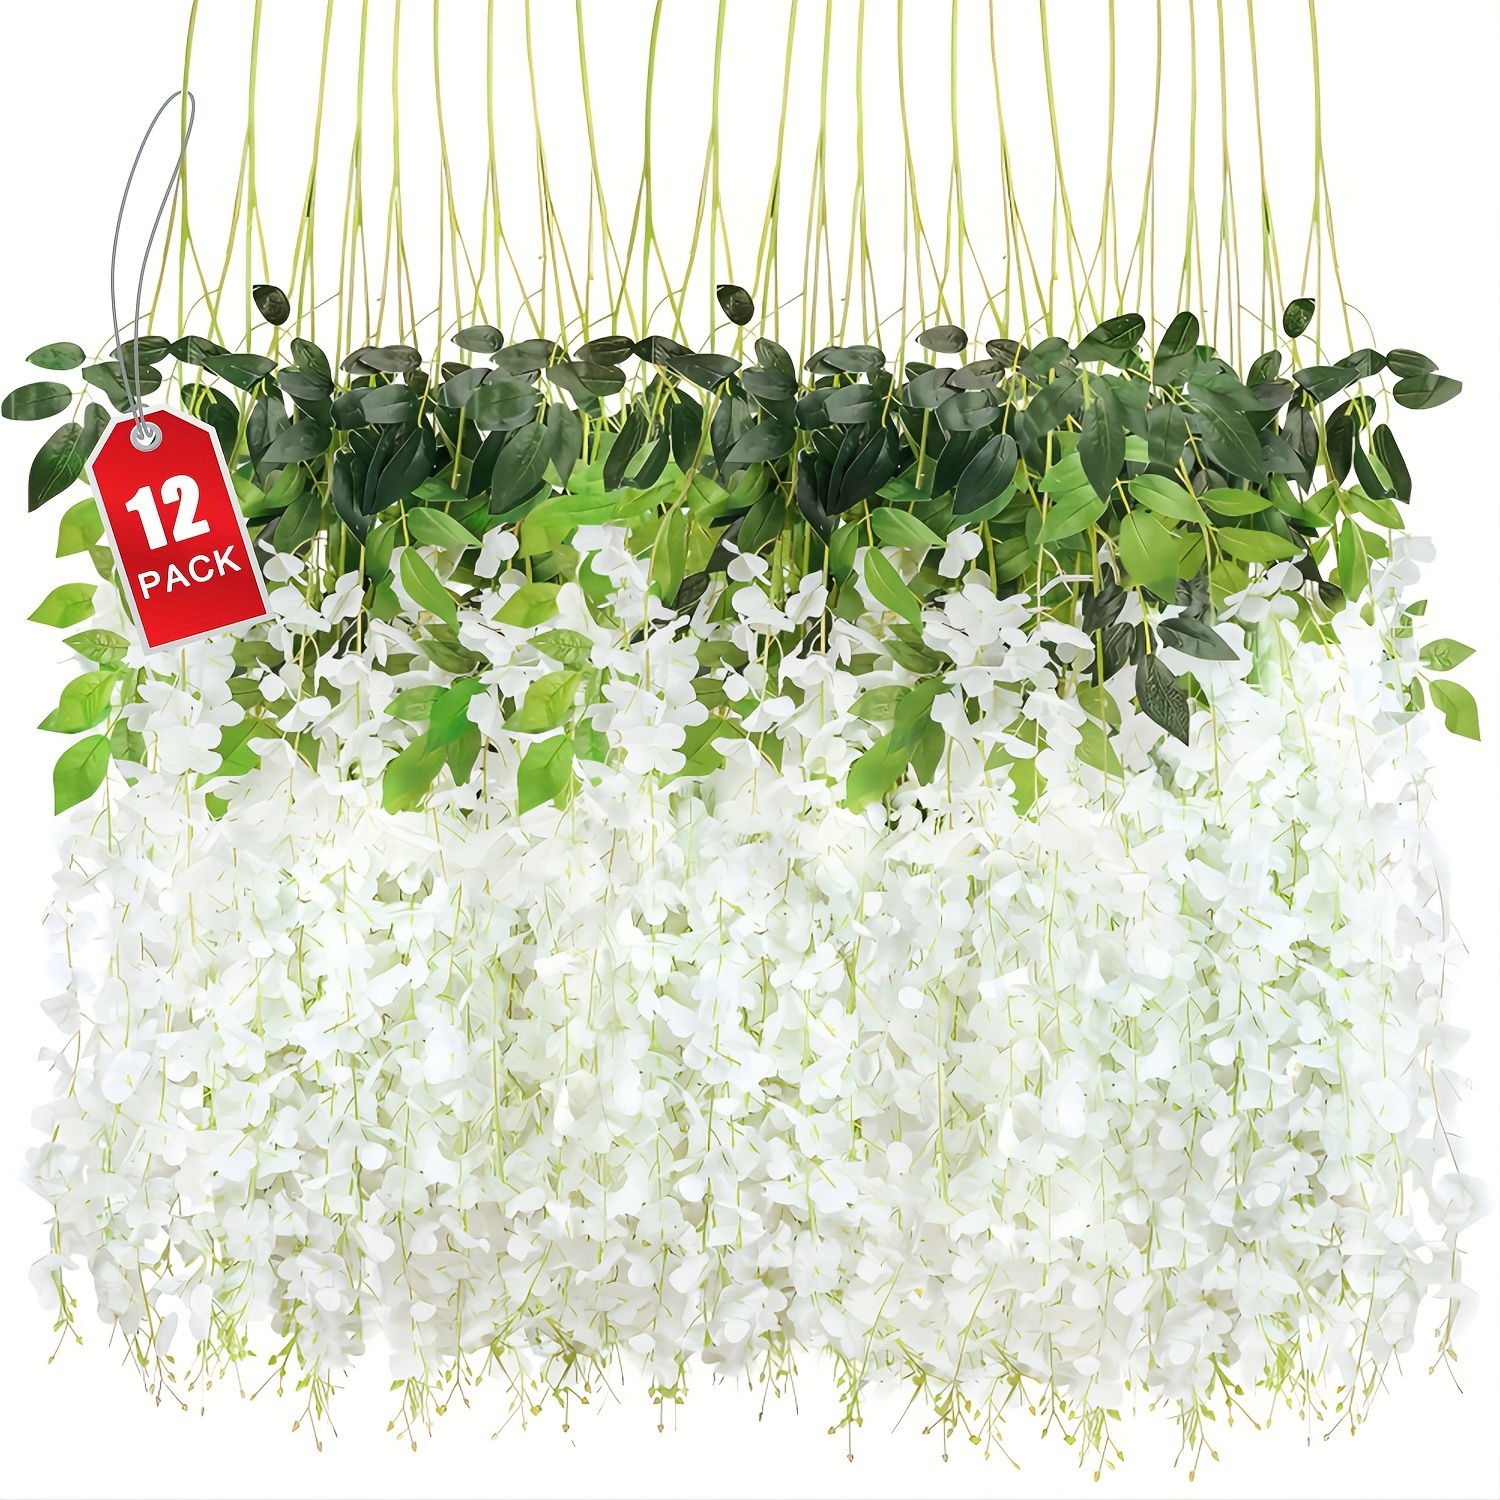 

Artificial Wisteria Hanging Flowers, 12pack Fake Hanging Flowers White Wisteria Vine Ratta Hanging Garland Silk Flowers Outdoor Indoor Wedding Arch Backdrop Party Room Wall Decor